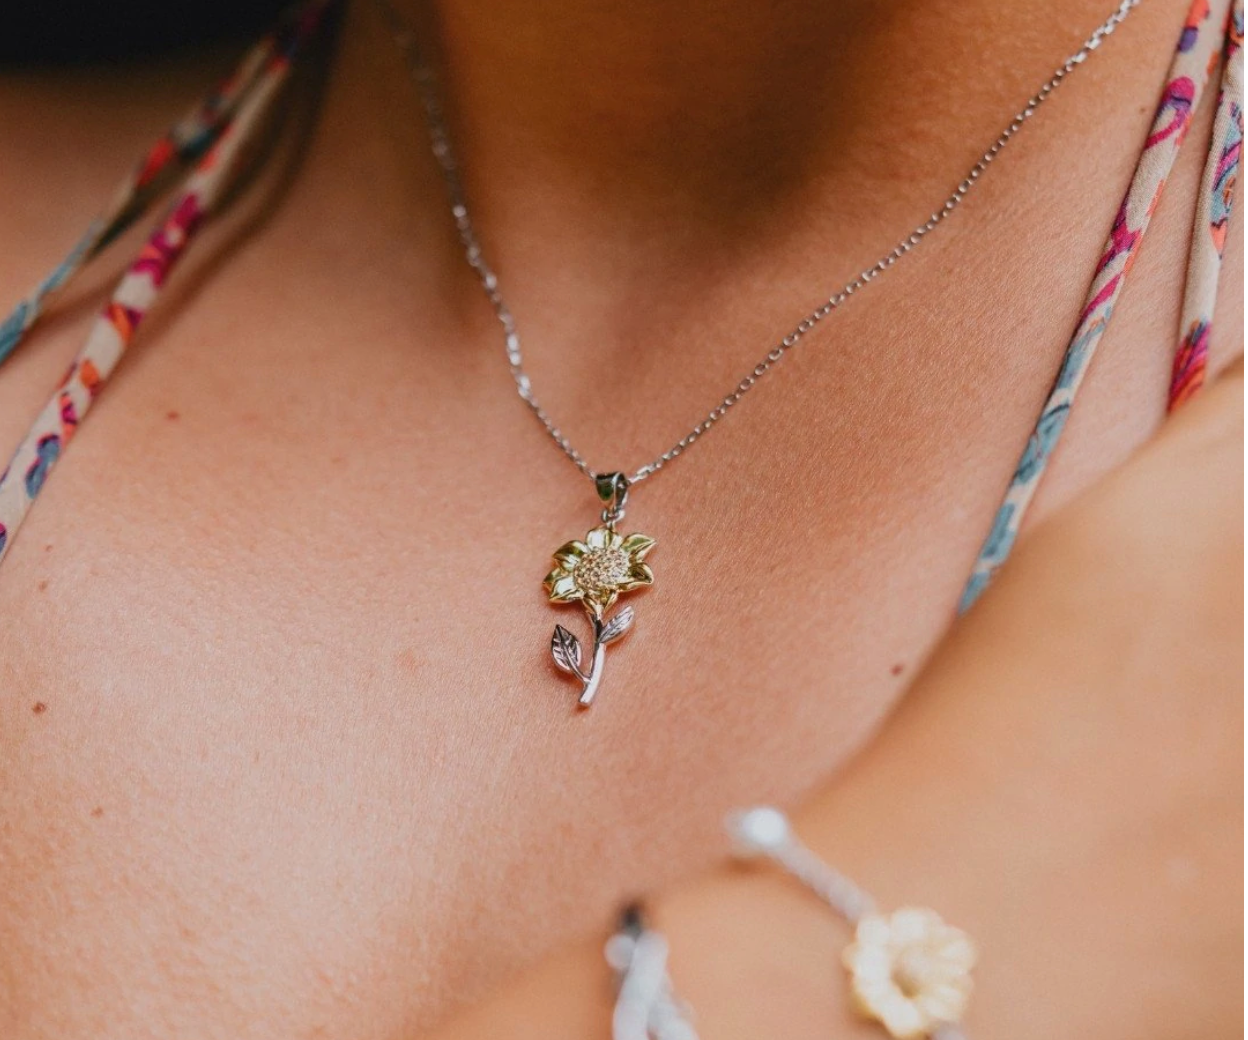 Blooming Sunflower Necklace